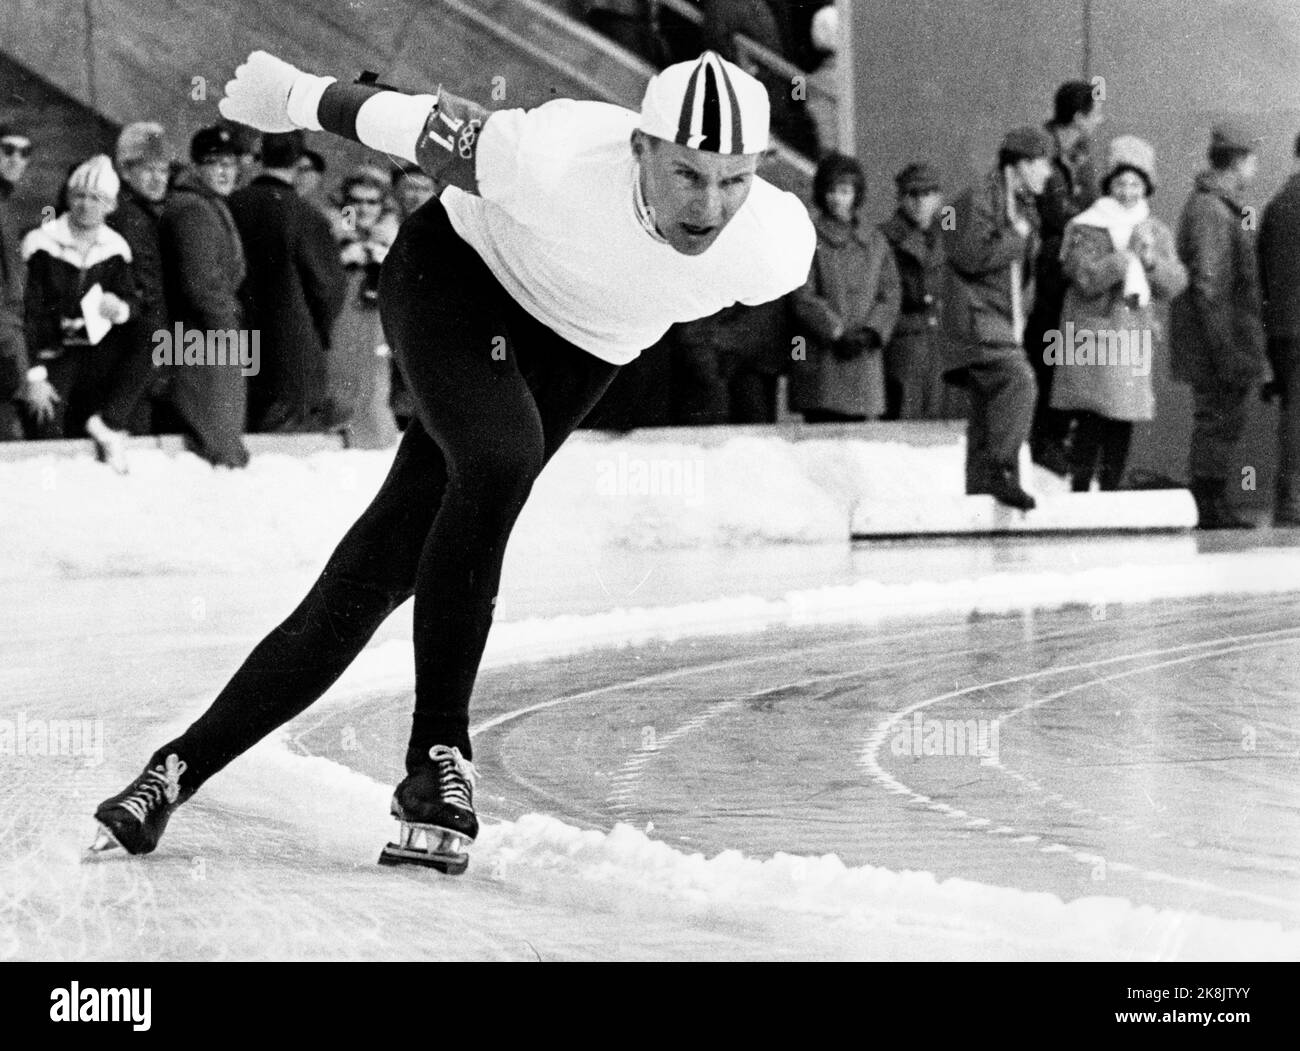 Innsbruck, Austria 196402 The 9th Olympic Winter Games. Fast skating, men, Knut Johannesen Kuppern in action. Knut Johannesen won 5000 meters and became No. 3 at 10,000 meters. Here in action of 5000 meters. Photo: NTB / NTB Stock Photo